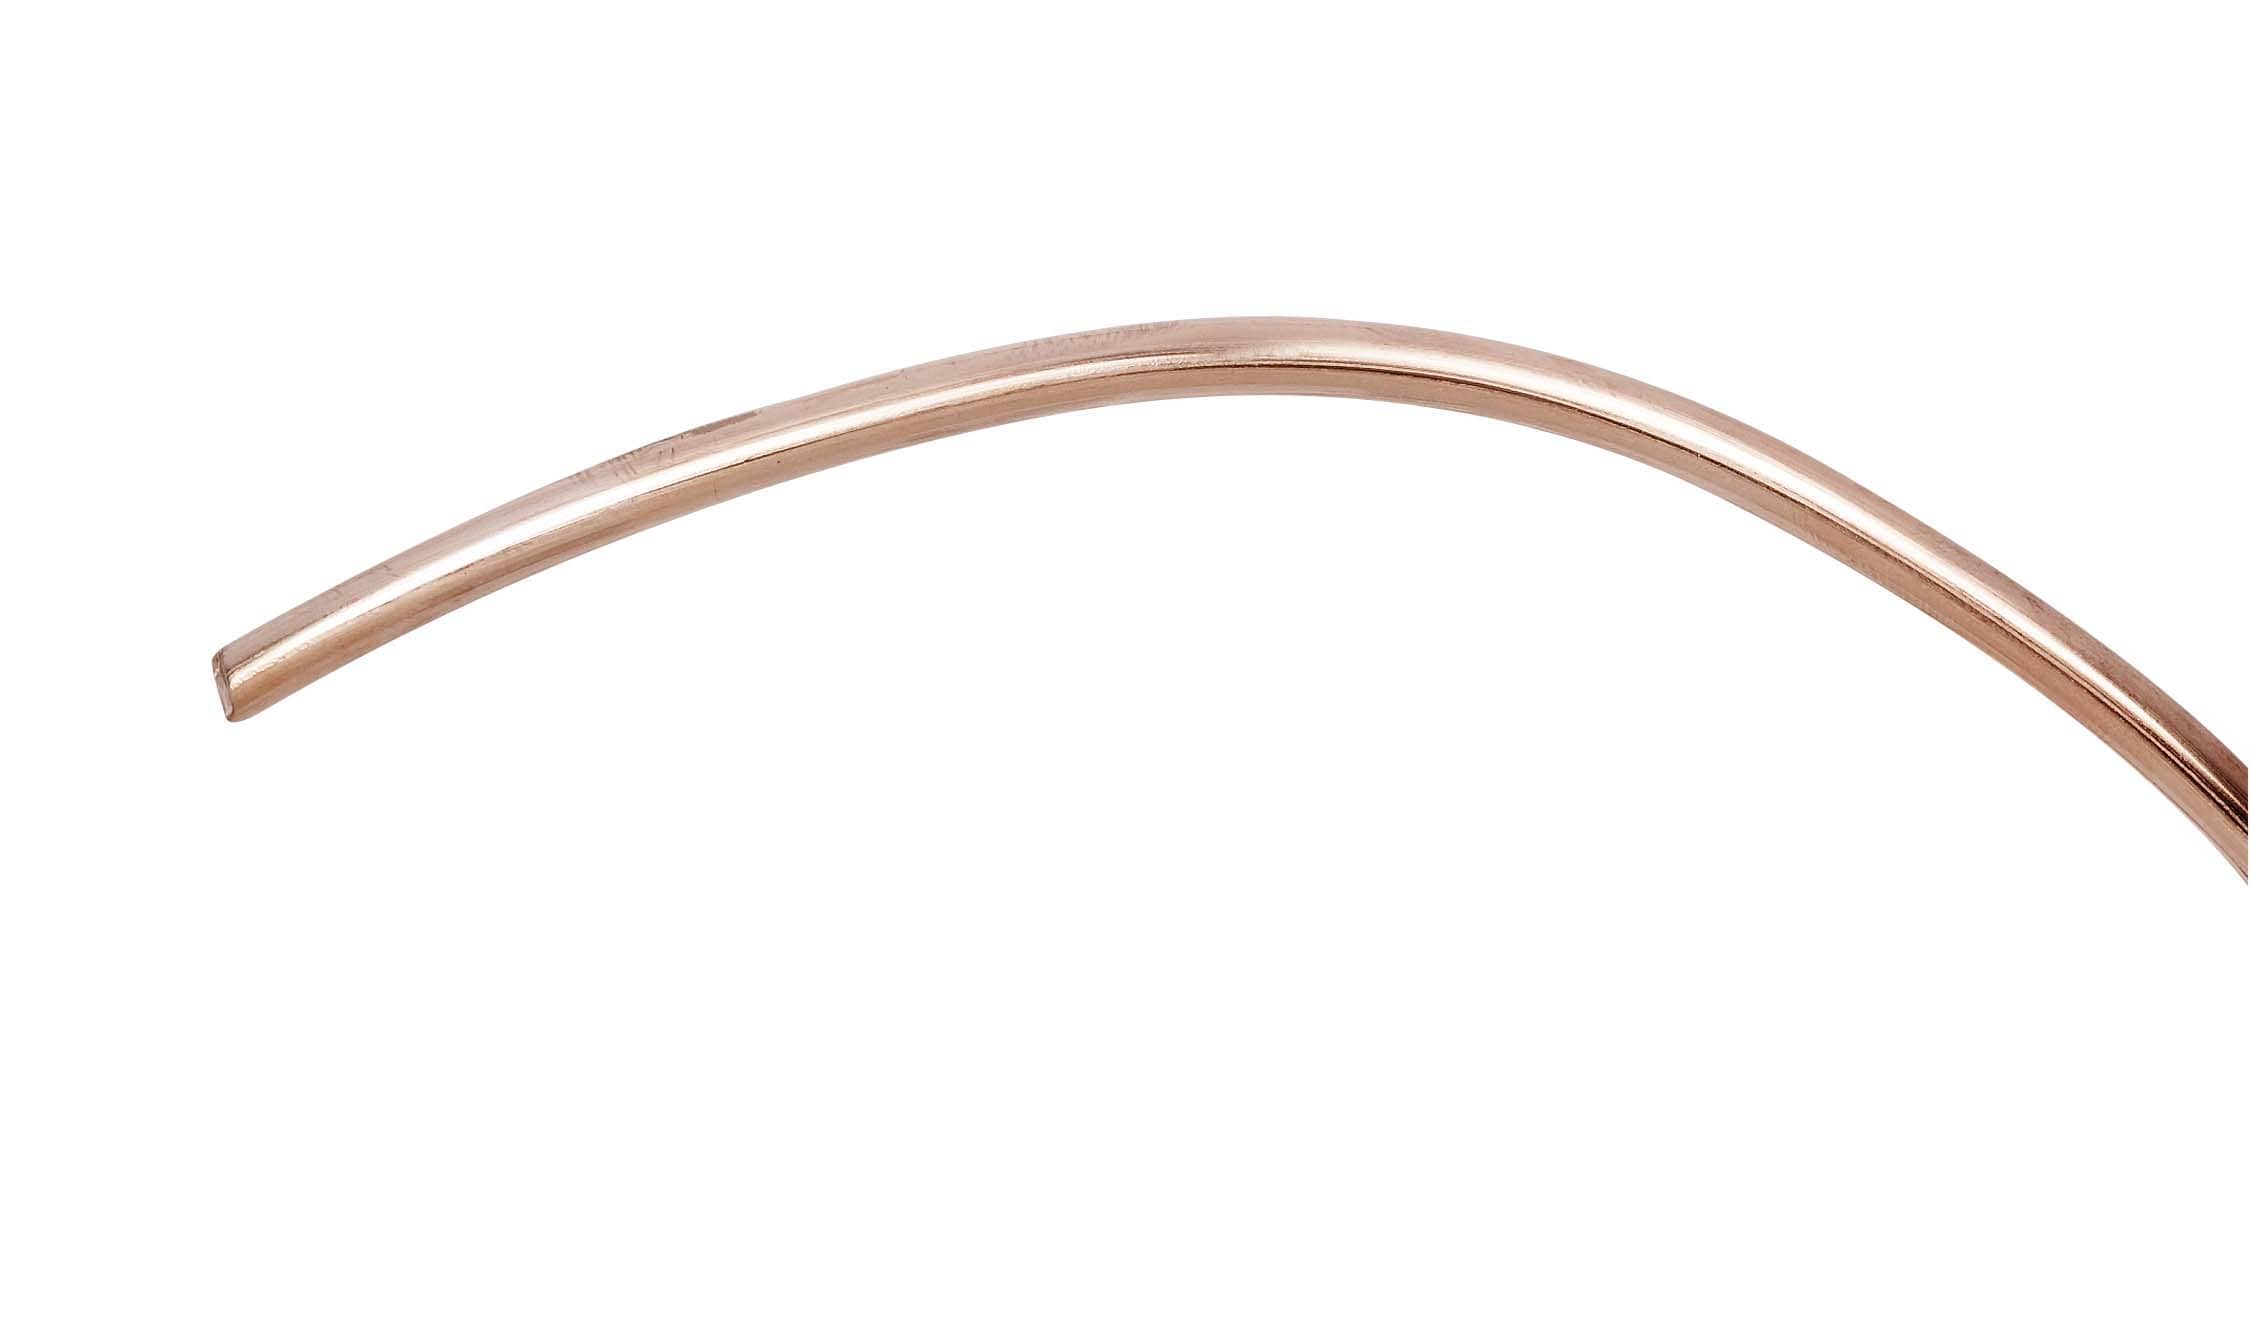 4.87 mm Round 6 Swg Bare Copper Wire, For Industrial at Rs 730/kg